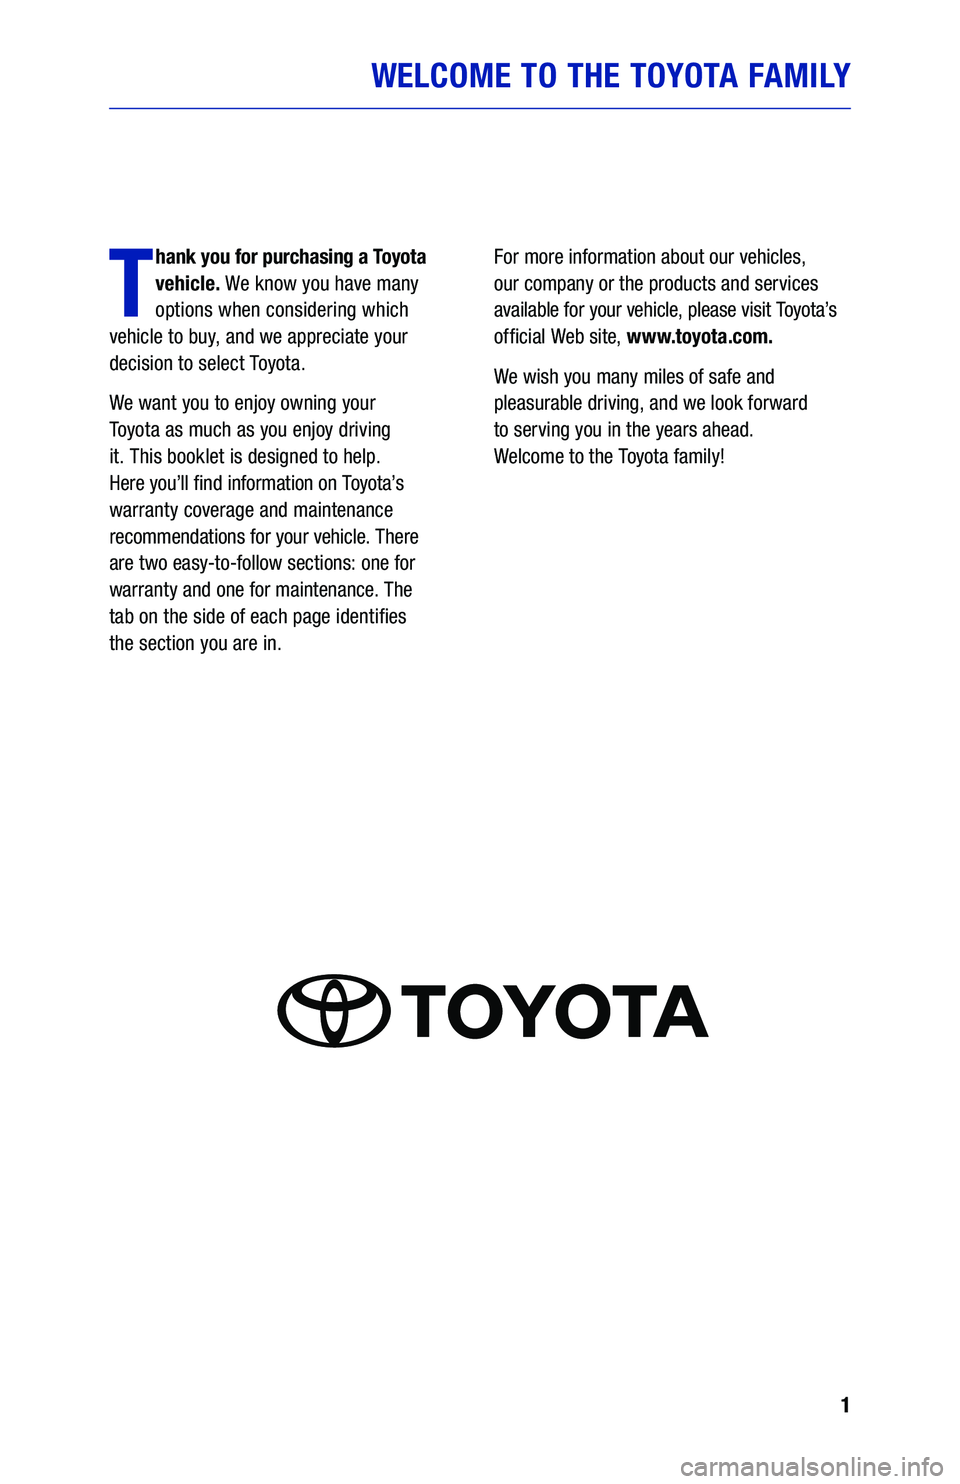 TOYOTA HIGHLANDER HYBRID 2019  Warranties & Maintenance Guides (in English) 1
WELCOME TO THE TOYOTA FAMILY
T
hank you for purchasing a Toyota 
vehicle.  We know you have many 
options when considering which   
vehicle to buy, and we appreciate your 
decision to select Toyota.